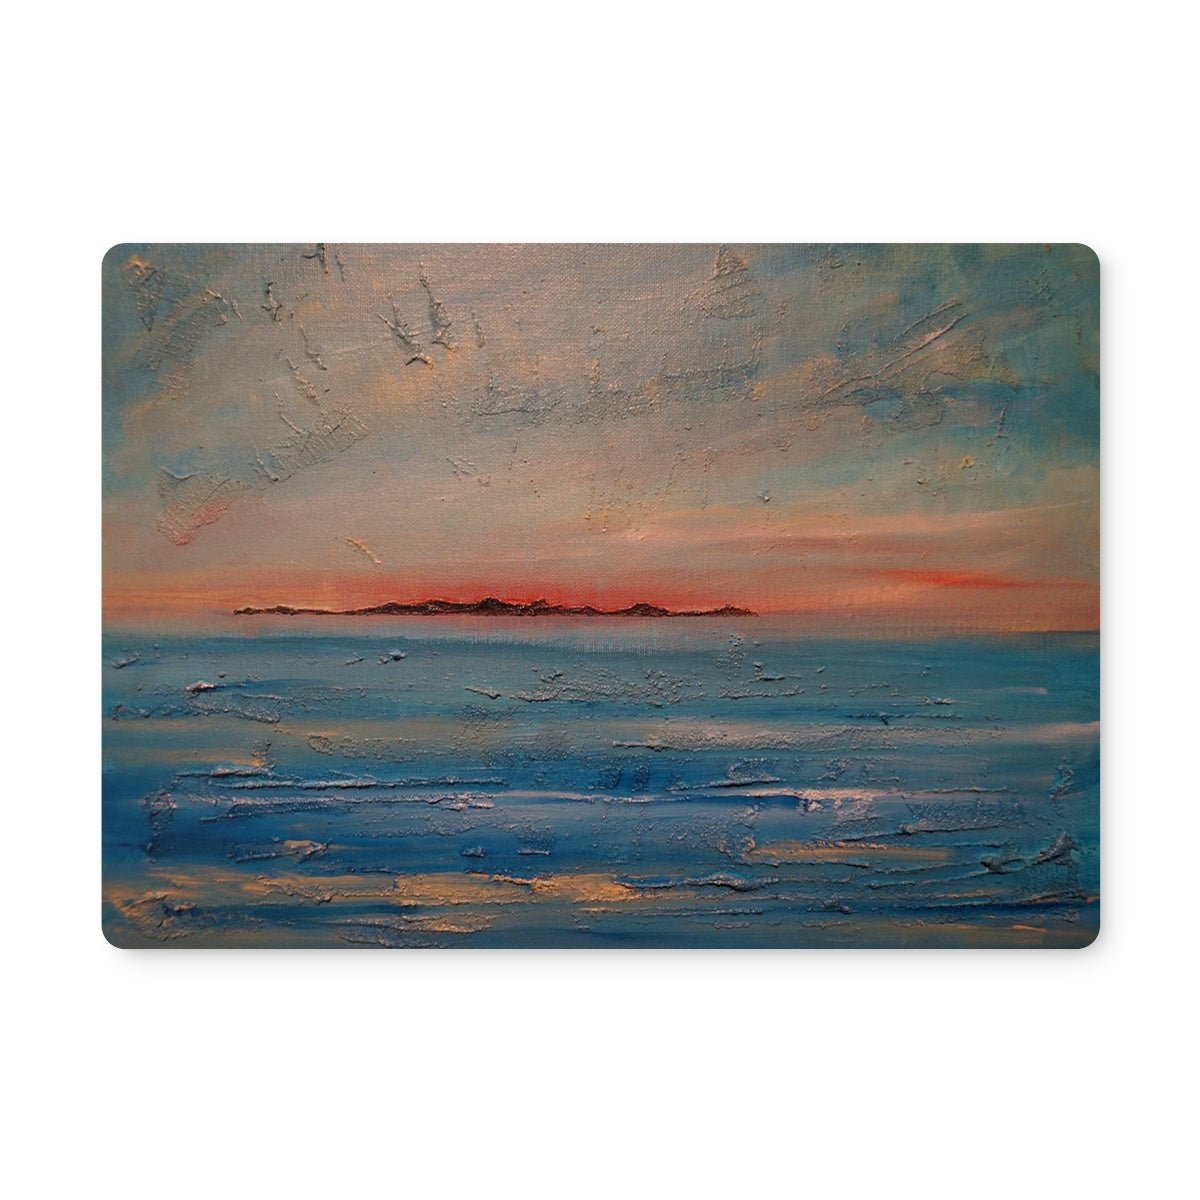 Gigha Sunset Art Gifts Placemat-Placemats-Hebridean Islands Art Gallery-6 Placemats-Paintings, Prints, Homeware, Art Gifts From Scotland By Scottish Artist Kevin Hunter